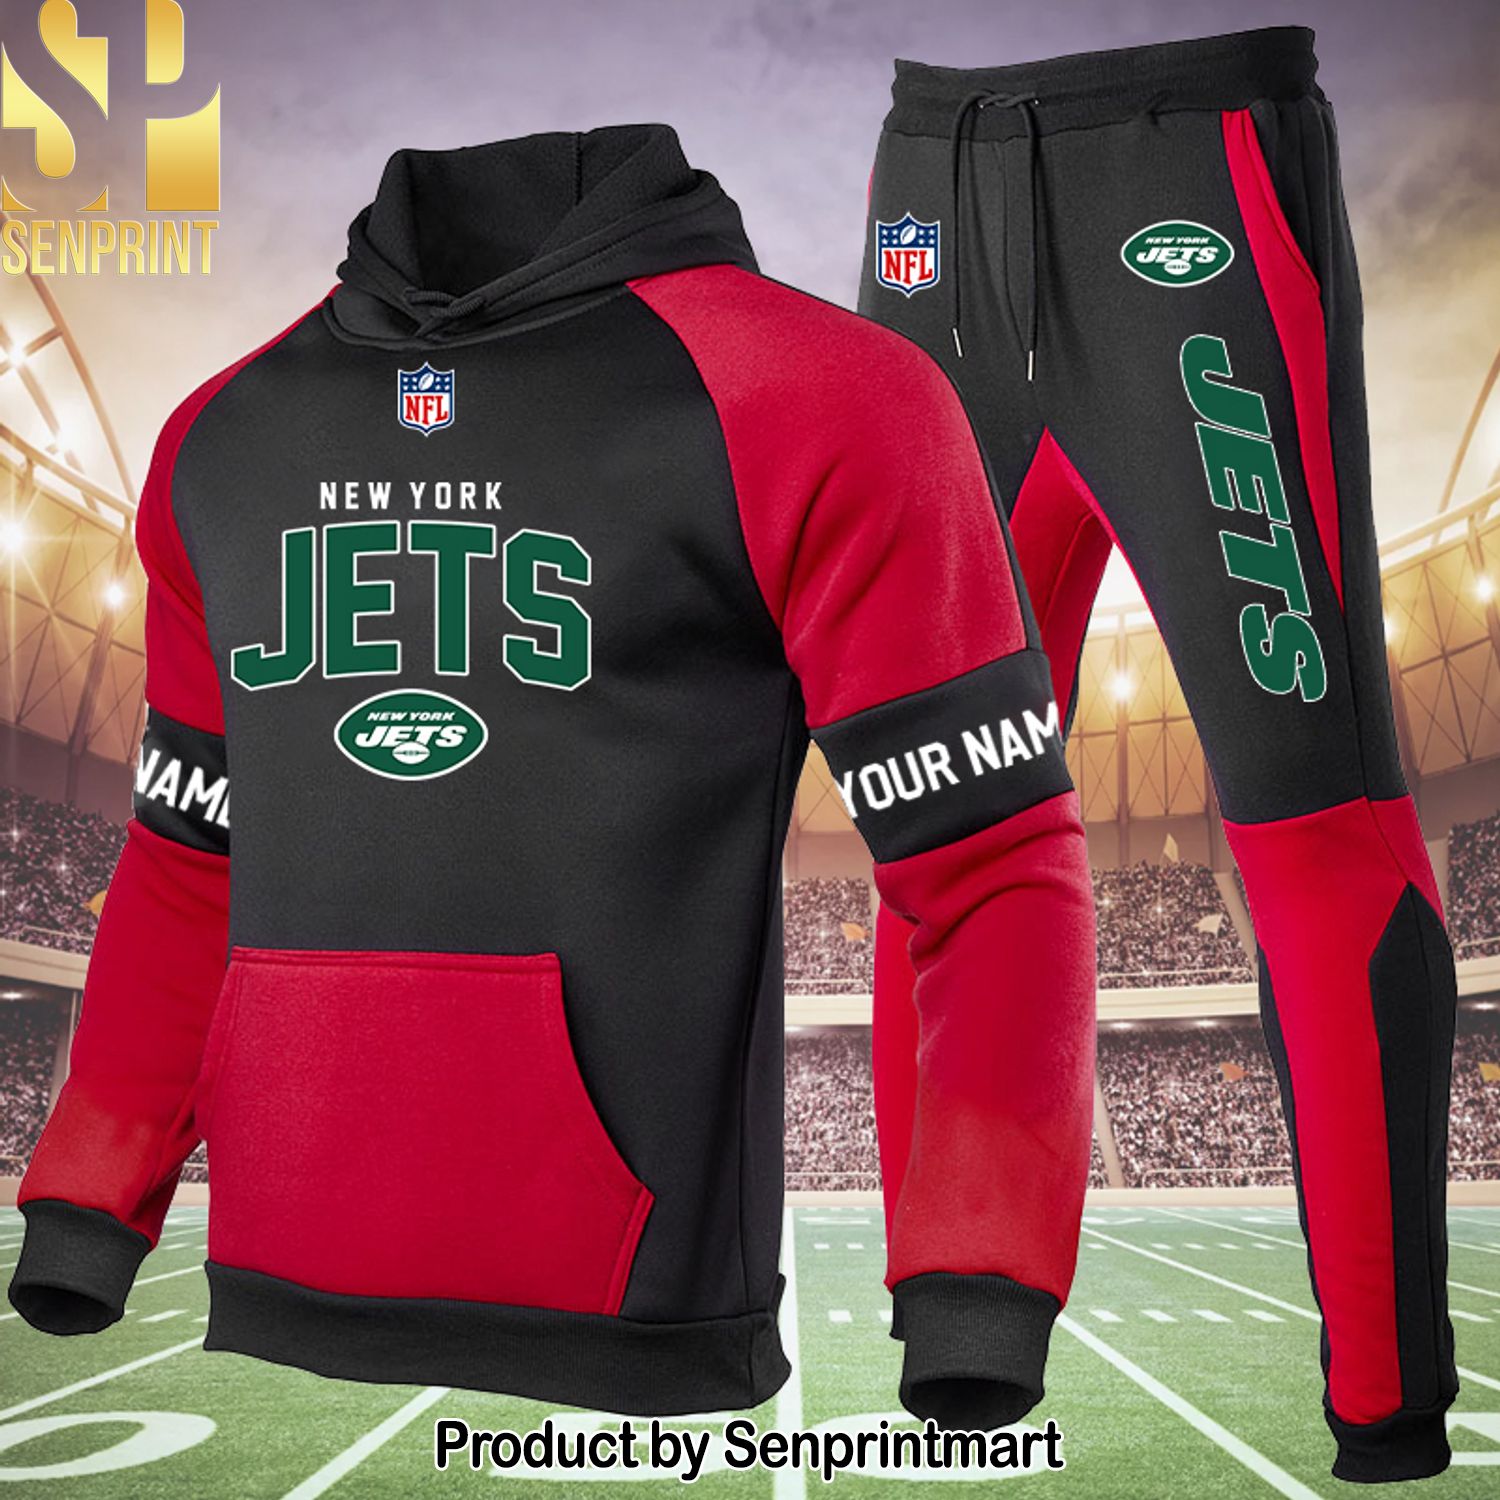 New York Jets All Over Printed Shirt and Pants